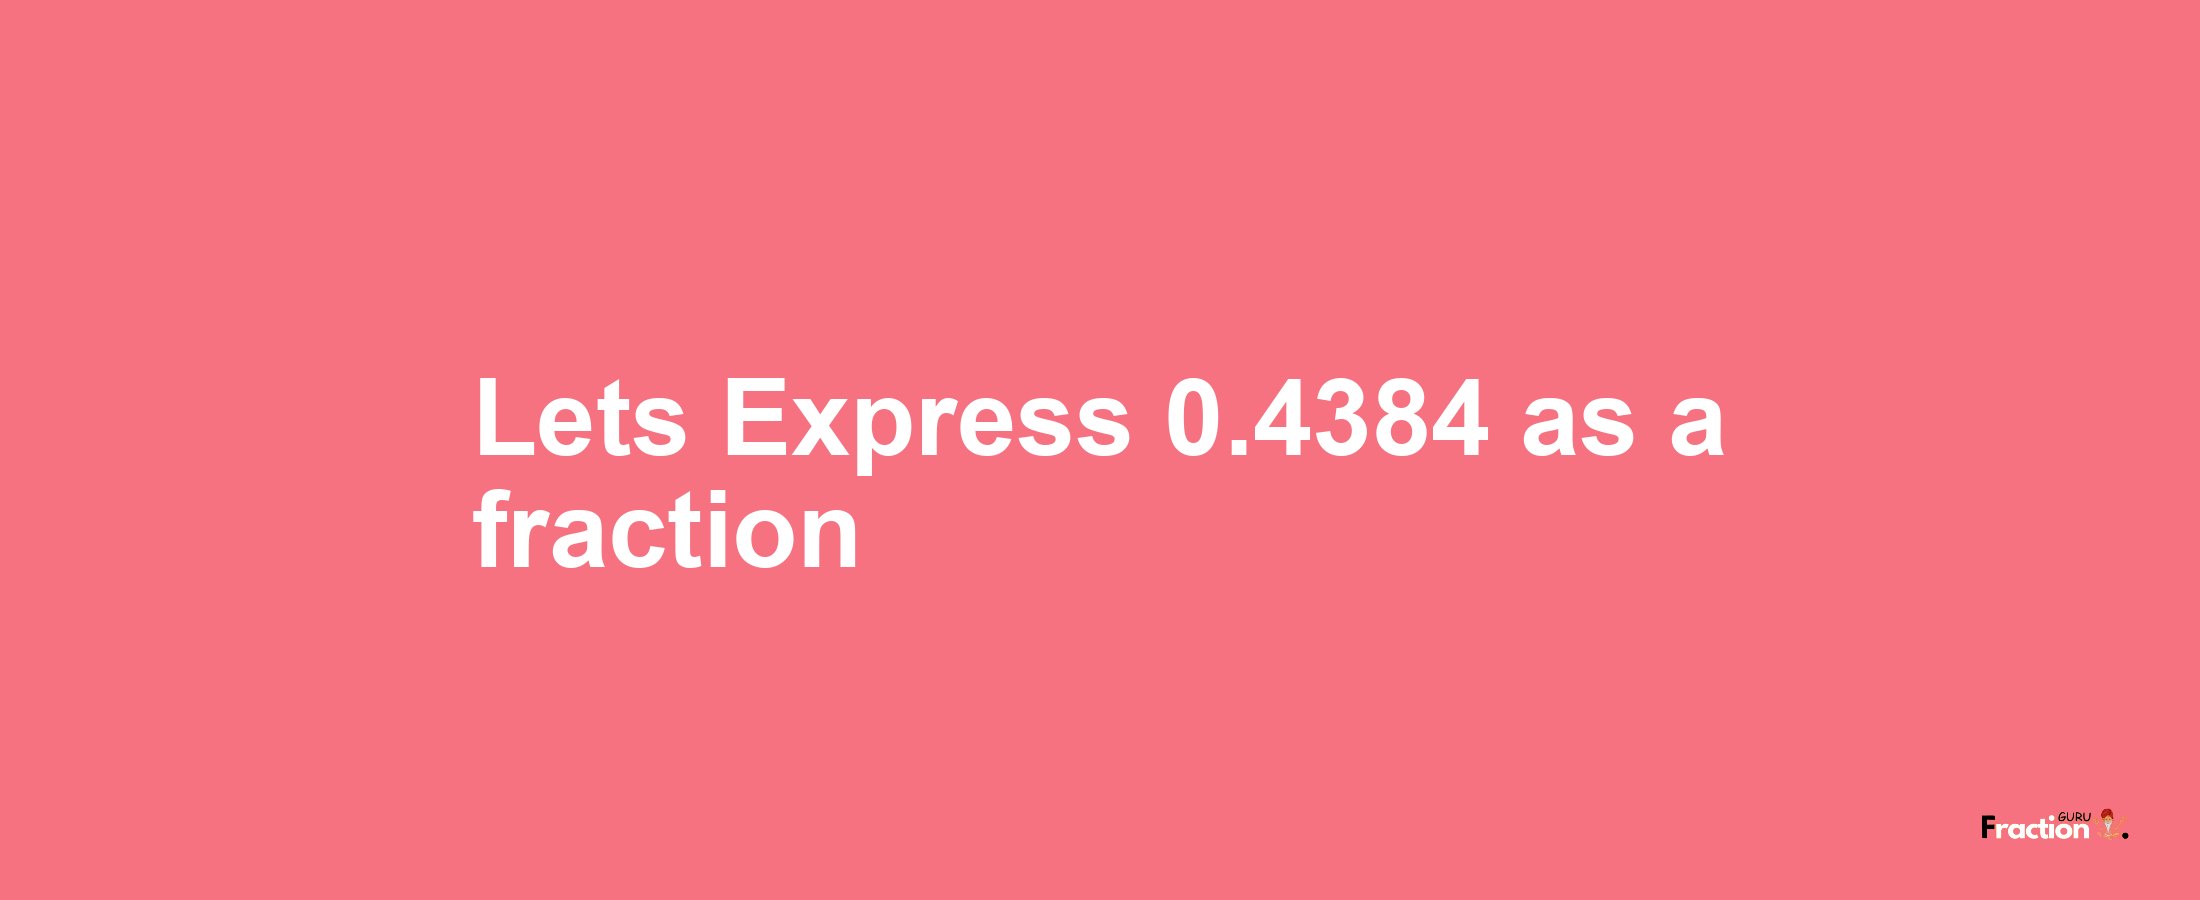 Lets Express 0.4384 as afraction